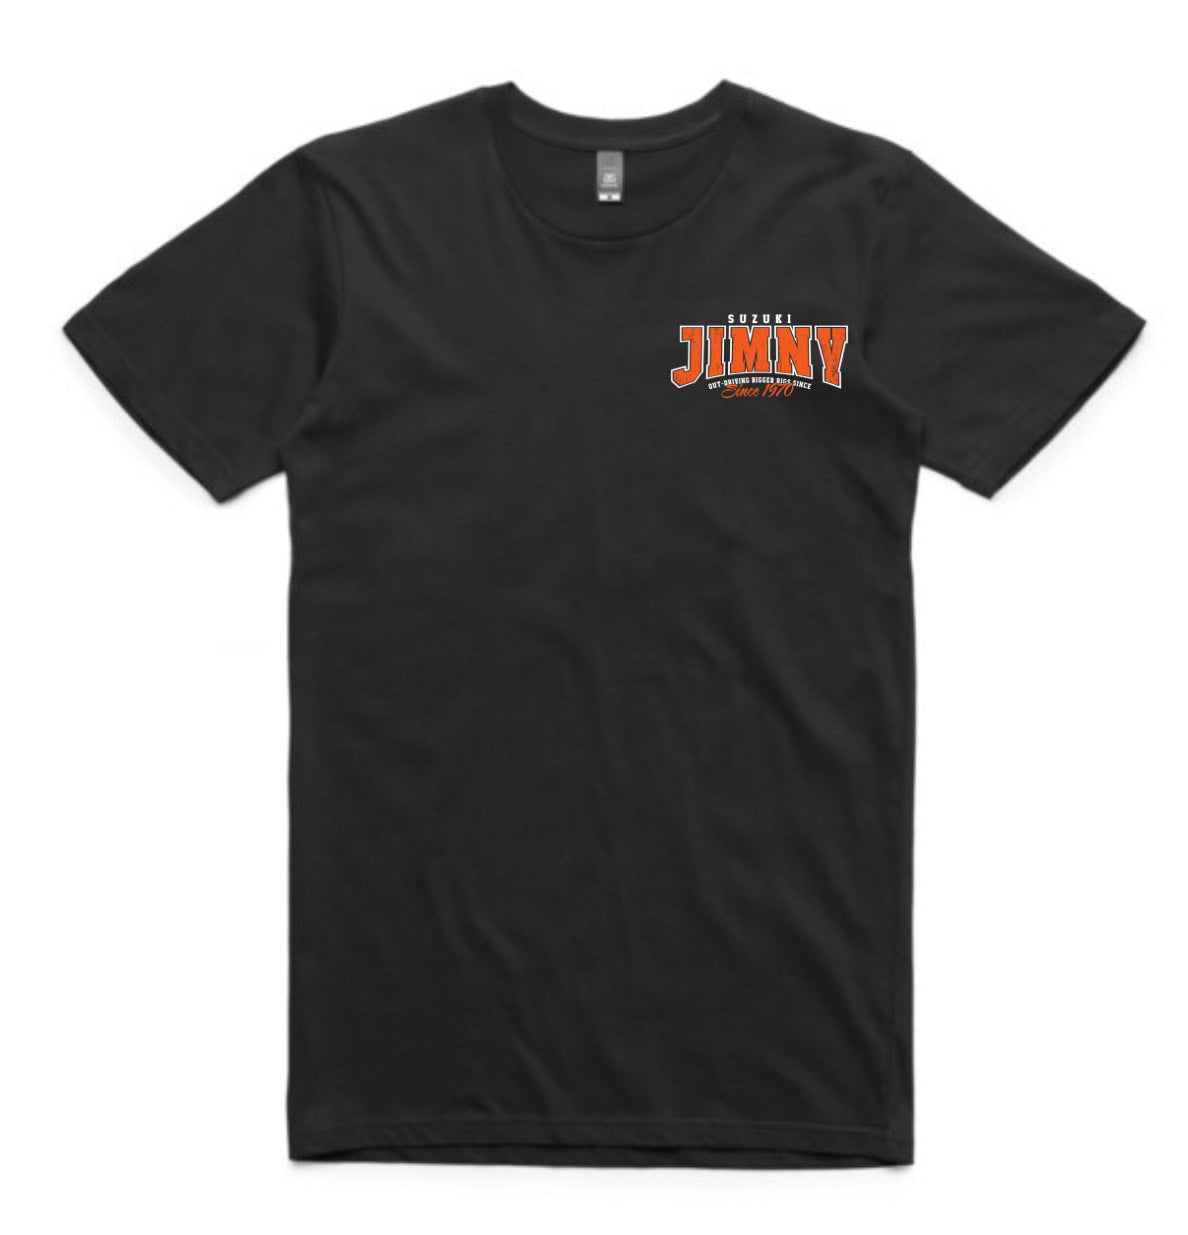 Out-Driving Bigger Rigs Tee